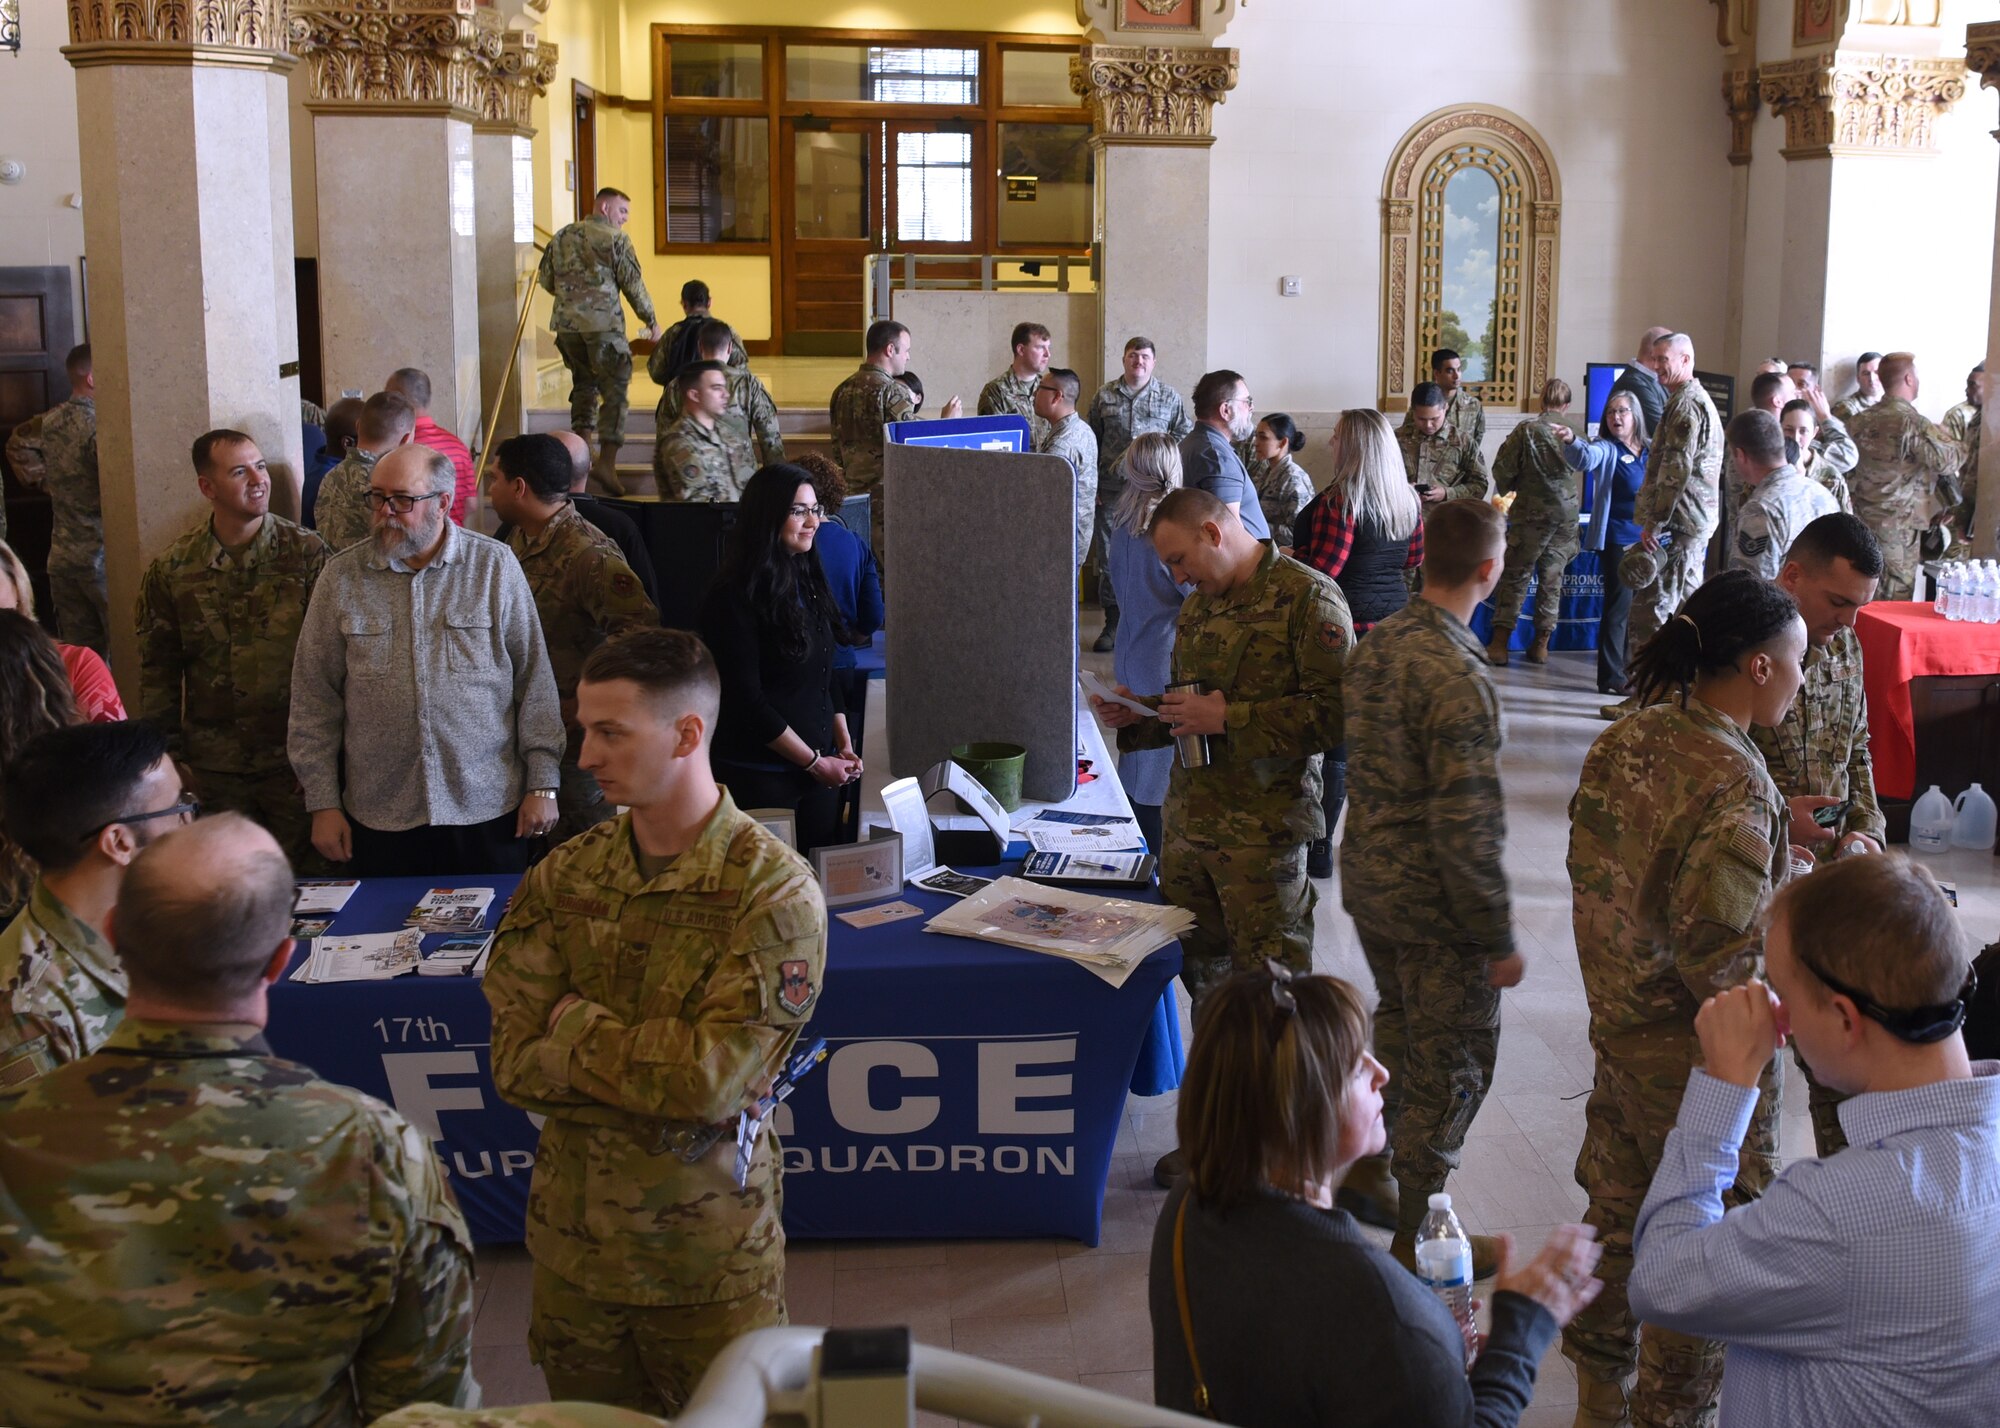 Goodfellow members socialize and view information about the base before the Commander’s Call at Murphey Performance Hall in San Angelo, Texas, Jan. 9, 2020.  Light refreshments and a variety of information booths were available before and after the event. (U.S. Air Force photo by Airman 1st Class Abbey Rieves)